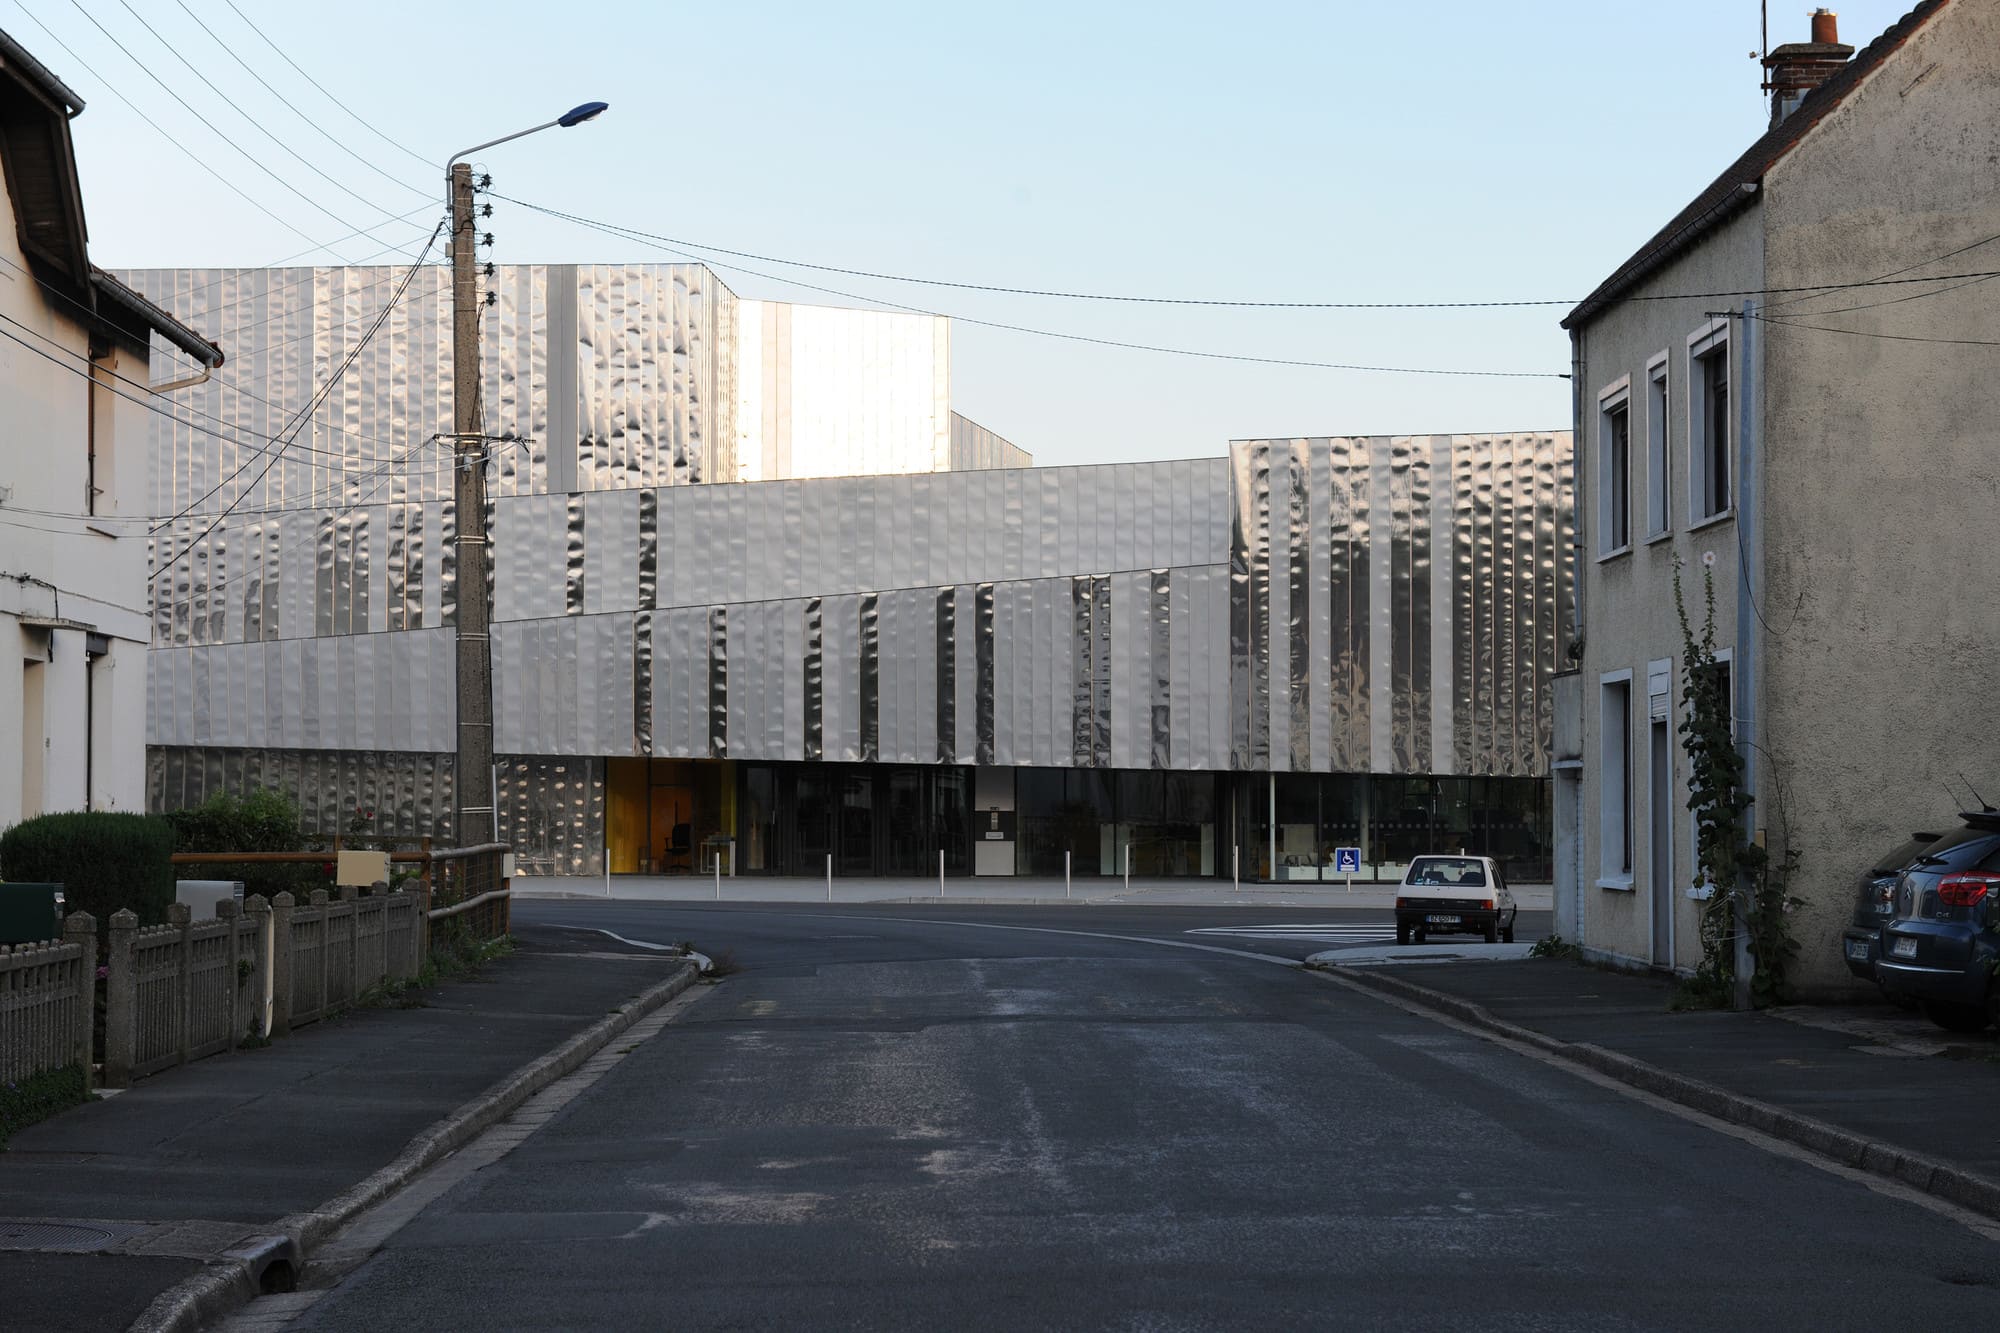 Multicultural Centre in Isbergues